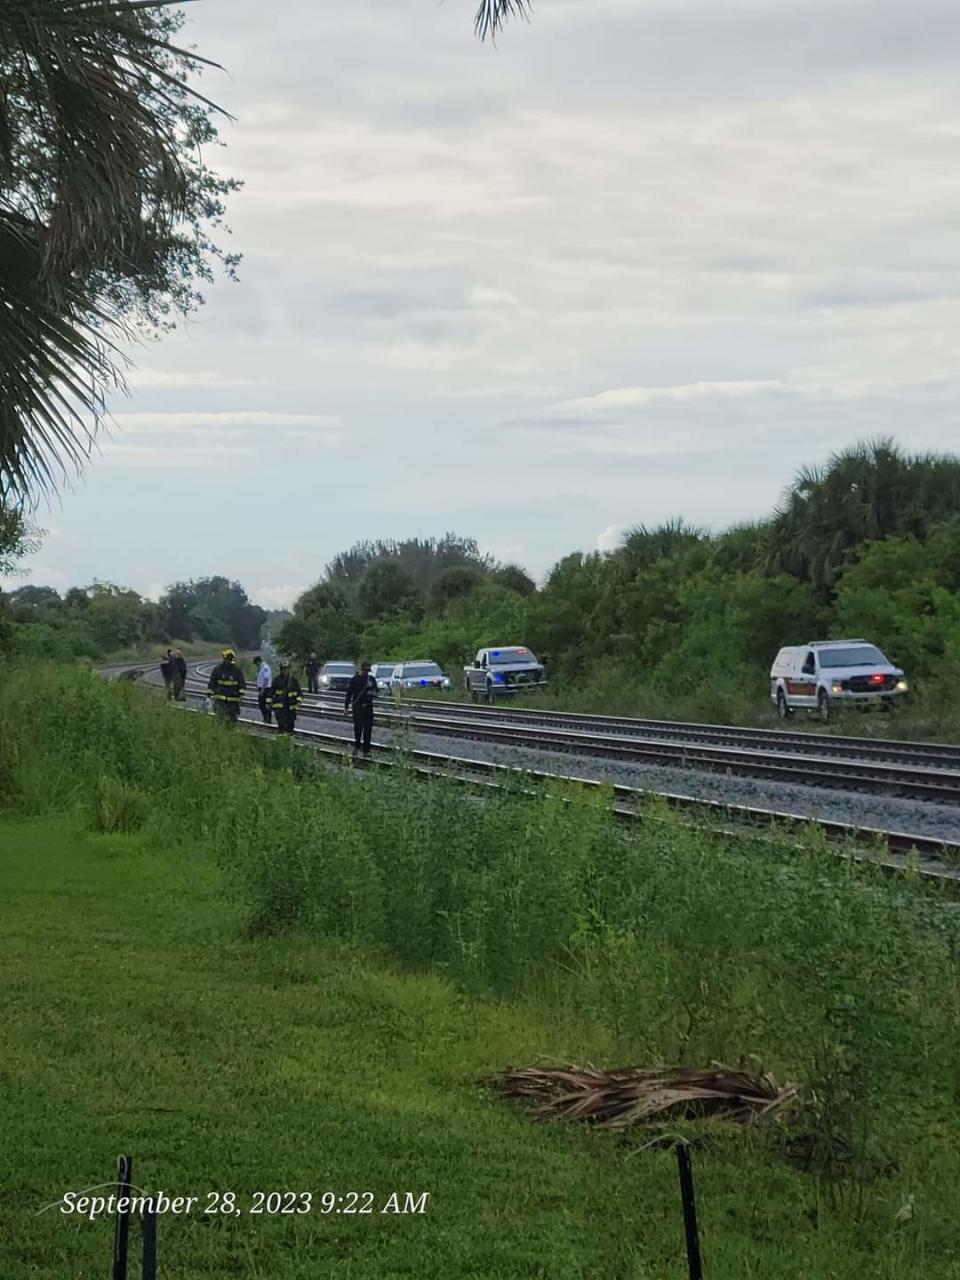 Investigators are in the 4400 block of South Indian River Drive, after the St. Lucie County Sheriff's Office said a northbound Brightline train fatally struck a person trespassing on the tracks just north of Midway Road, Sept. 28, 2023. Brightline started its high-speed service between West Palm Beach and Orlando six days ago.